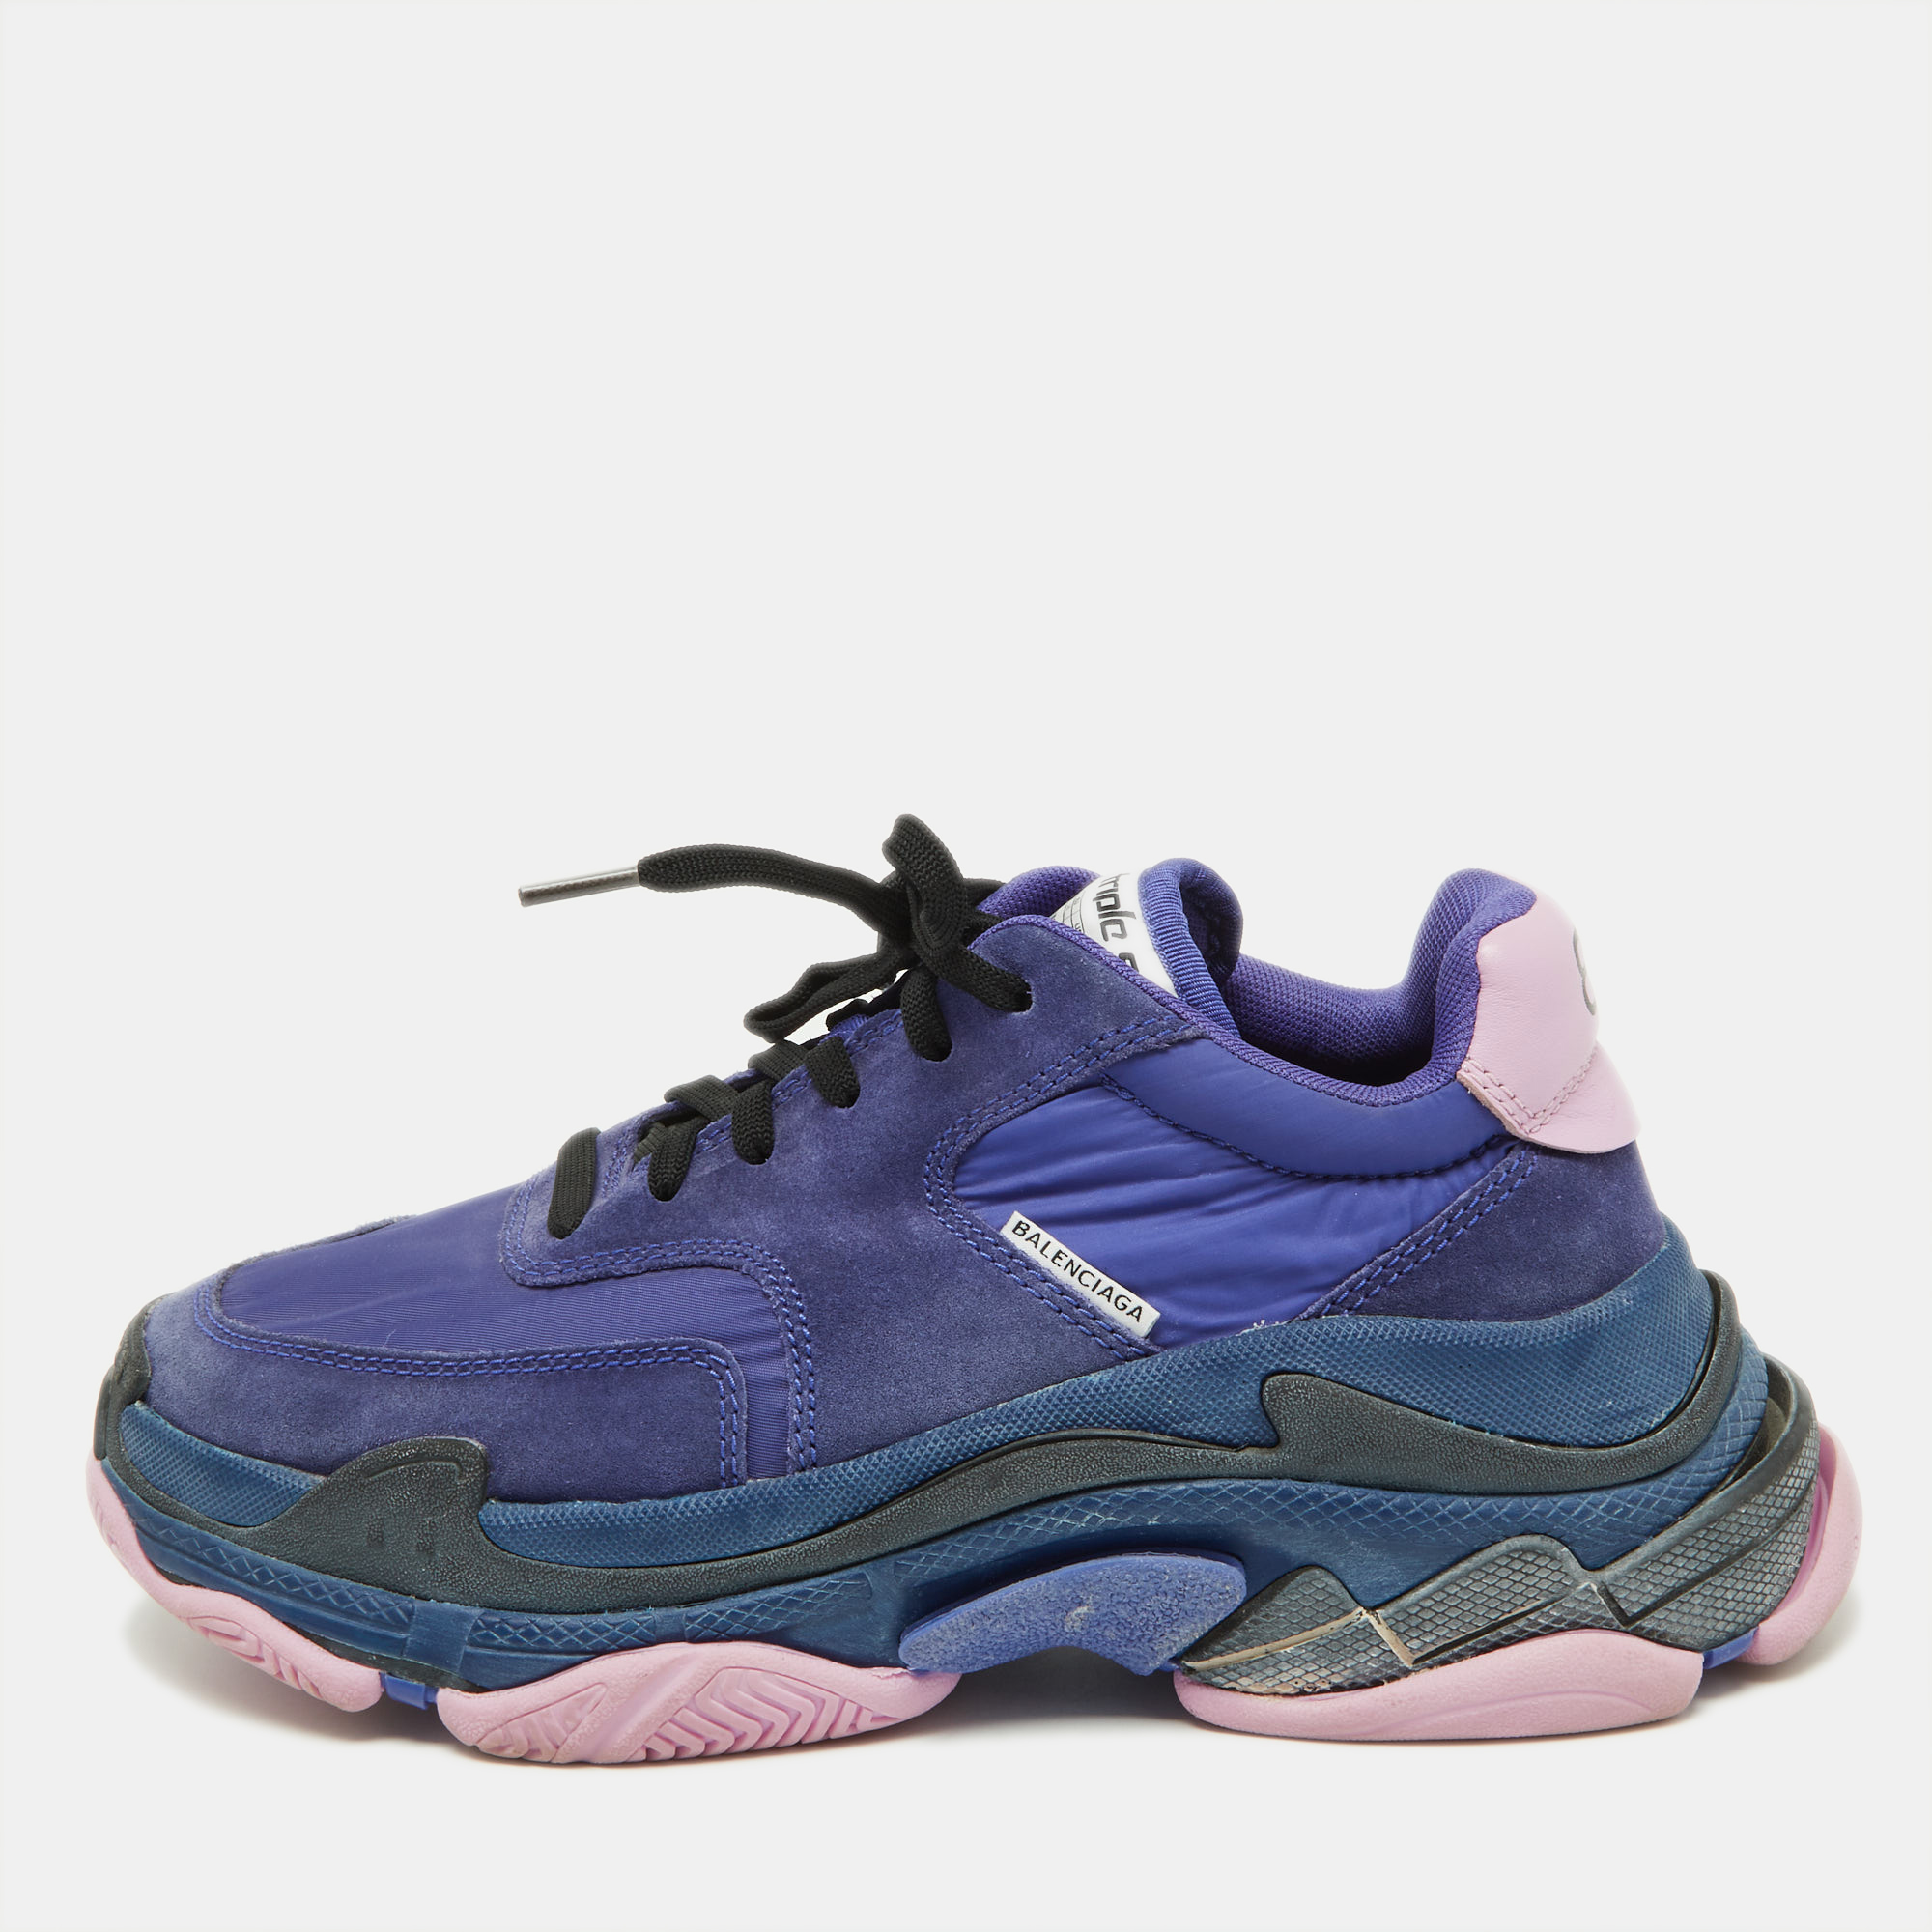 Balenciaga purple/pink nylon and leather triple s sneakers size 39